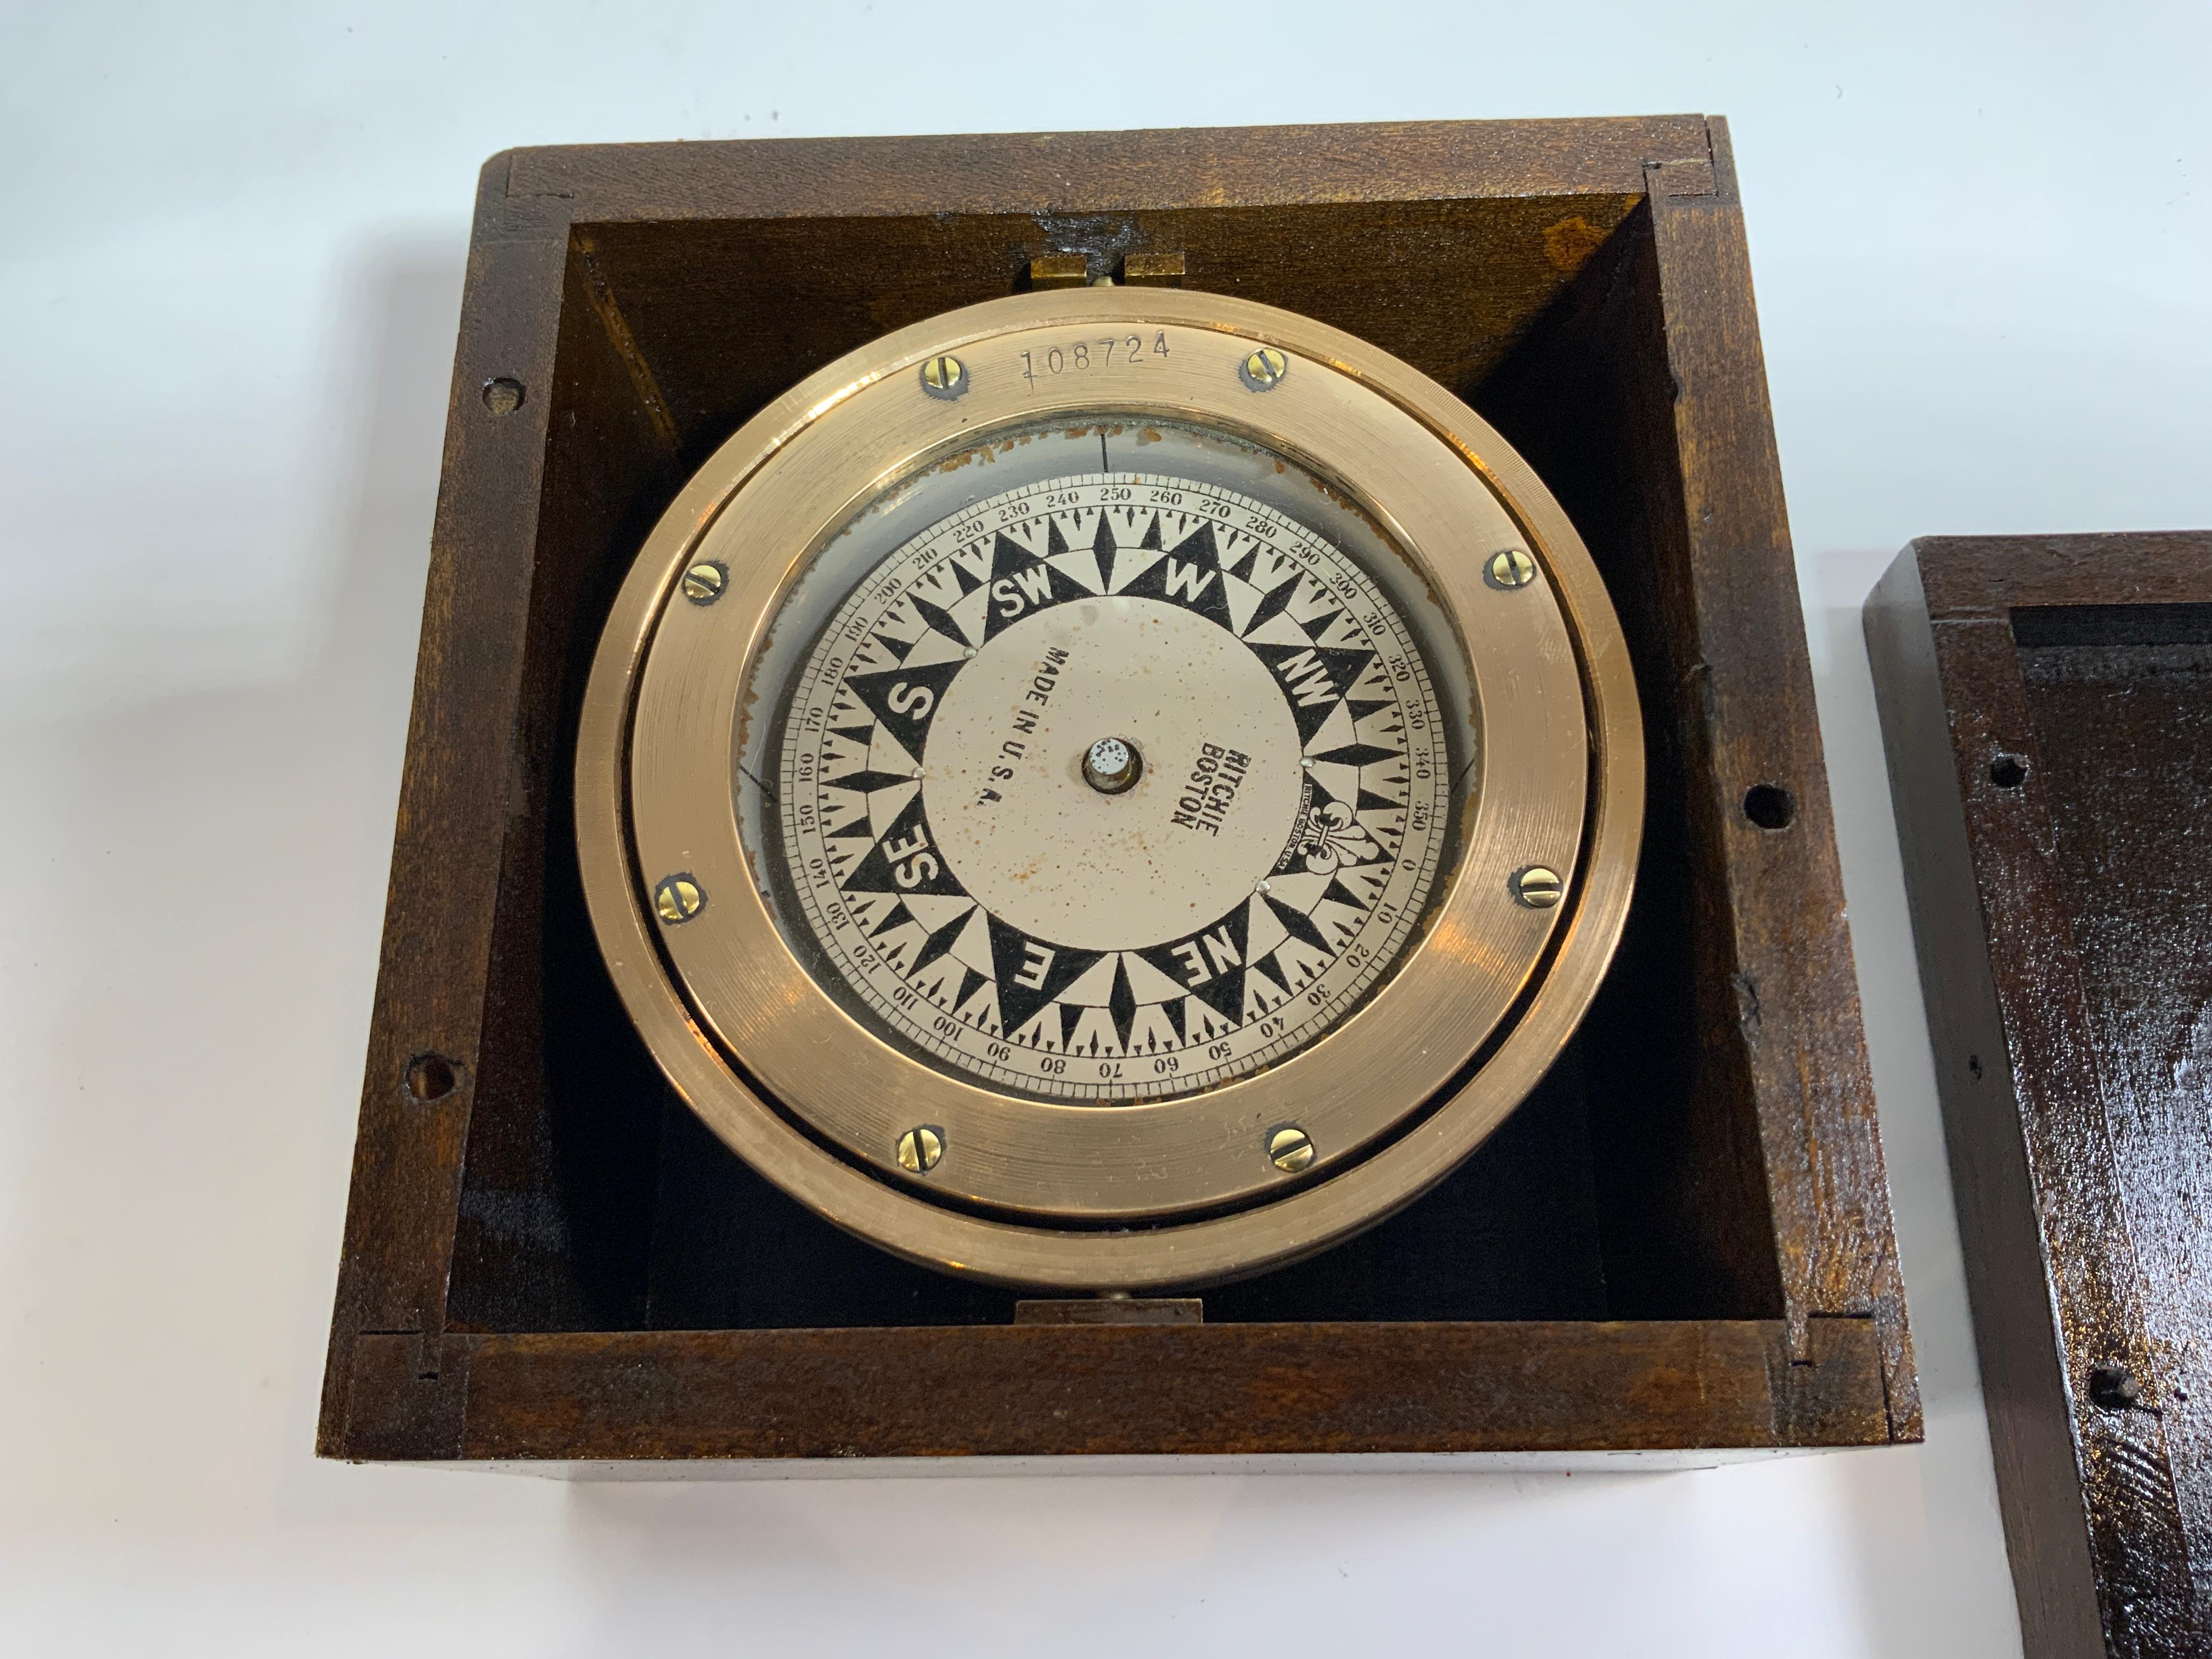 Solid brass gimballed boat box compass by Ritchie of Boston. Serial no. 108724. Oil filled compass. Brass is nicely polished. Fitted to a varnished box with lid. Circa 1930. 

Overall Dimensions: 6